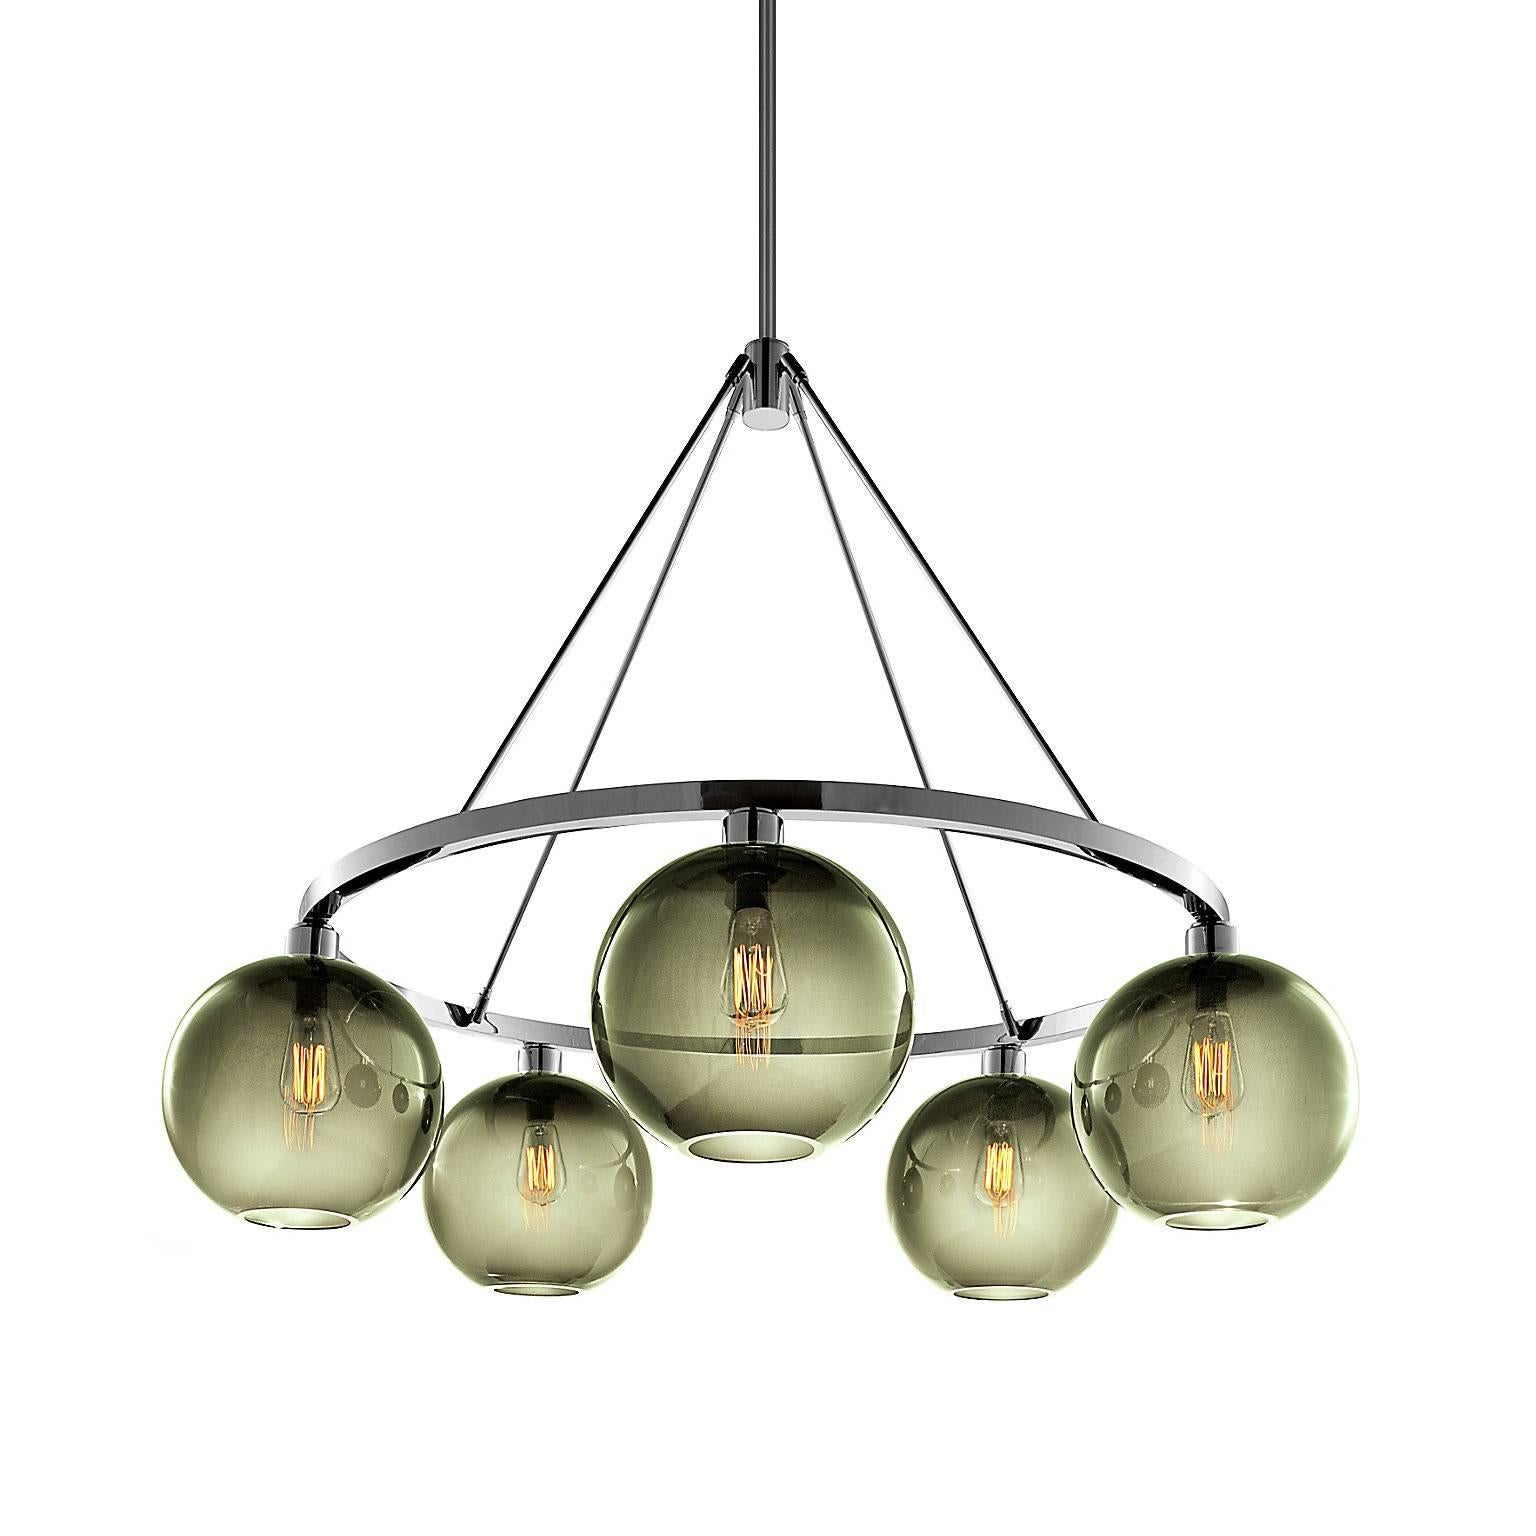 Imbued with timeless style, the striking Solitaire chandelier showcases sophisticated metal finishes, a Classic, handcrafted silhouette, and the soft glow of the Edison bulb at its center. Every single glass light that comes from Niche is handblown